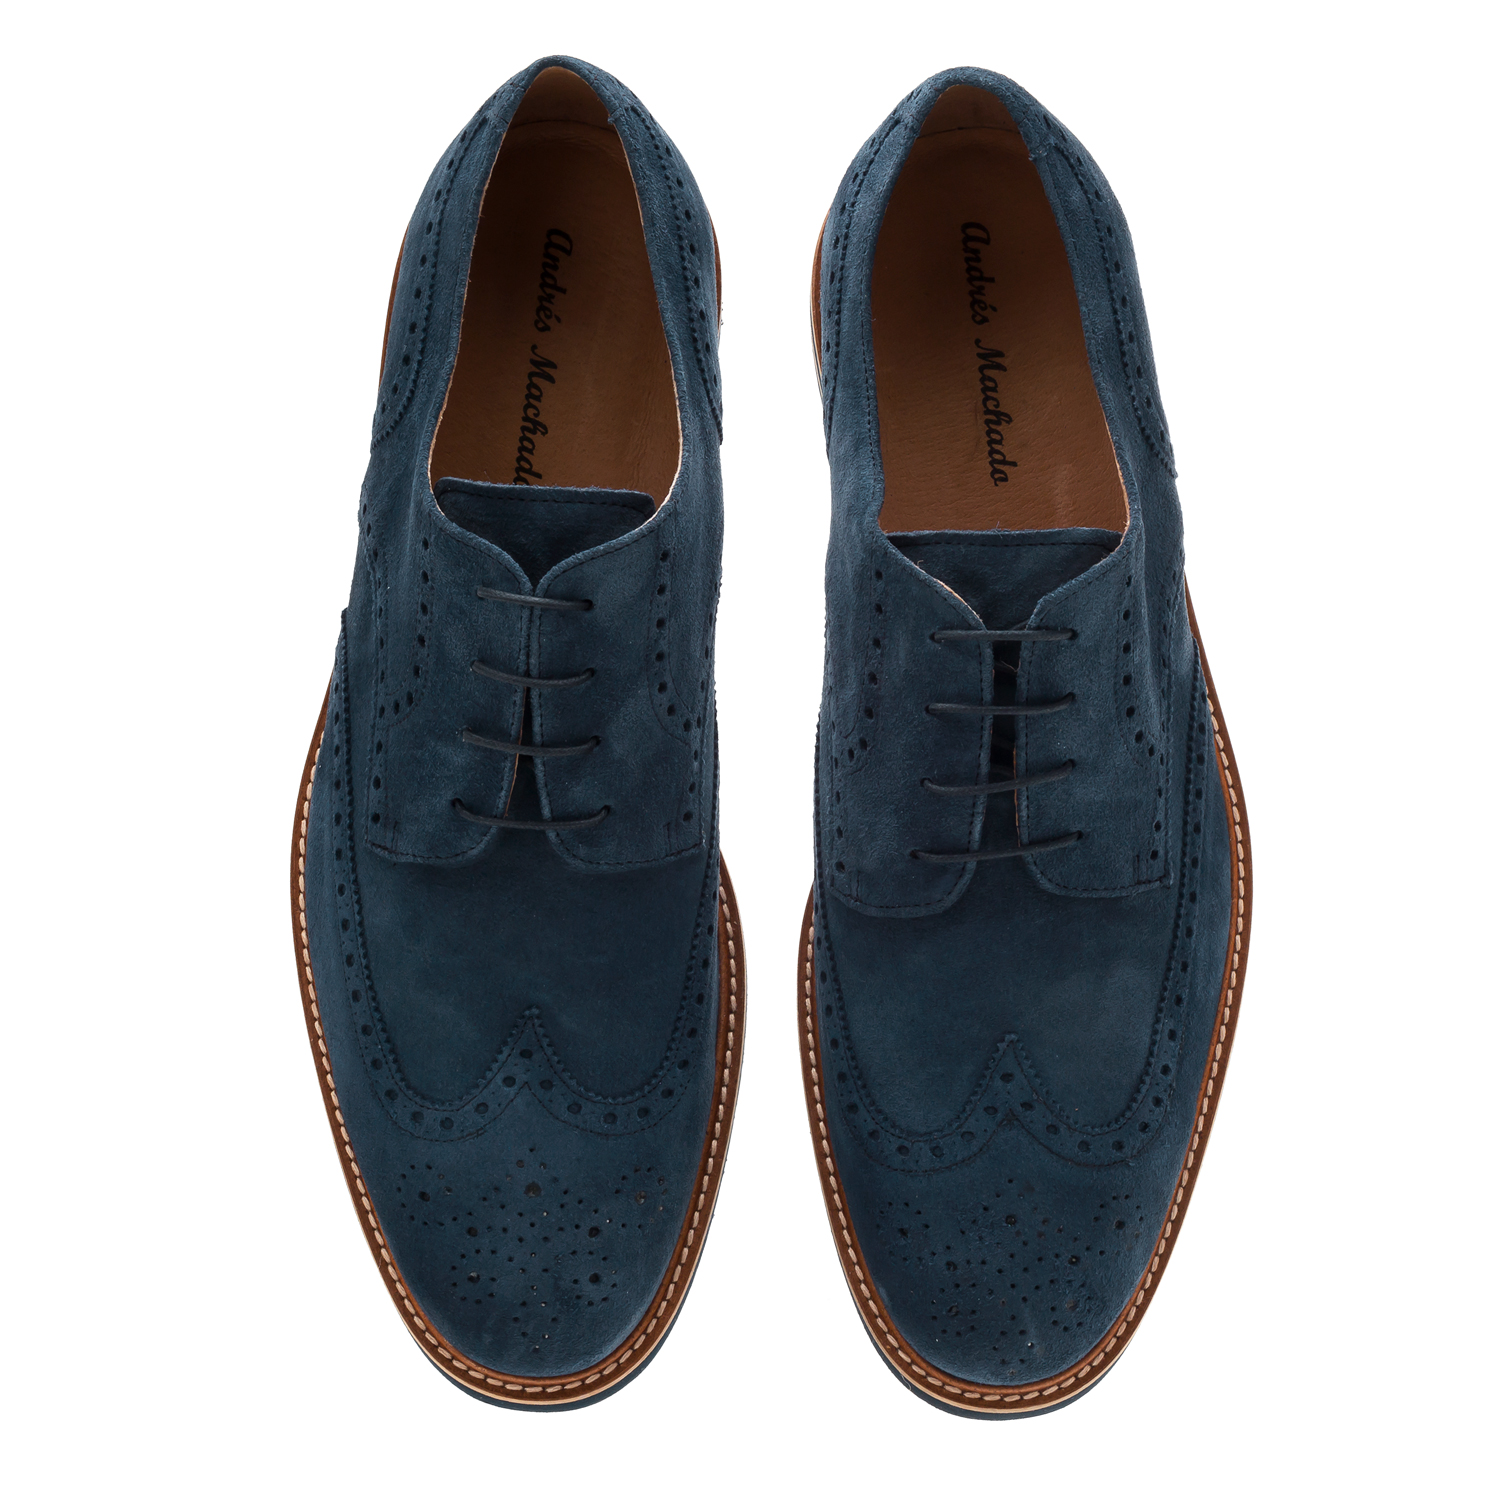 Oxford Shoes in Blue Split Leather 